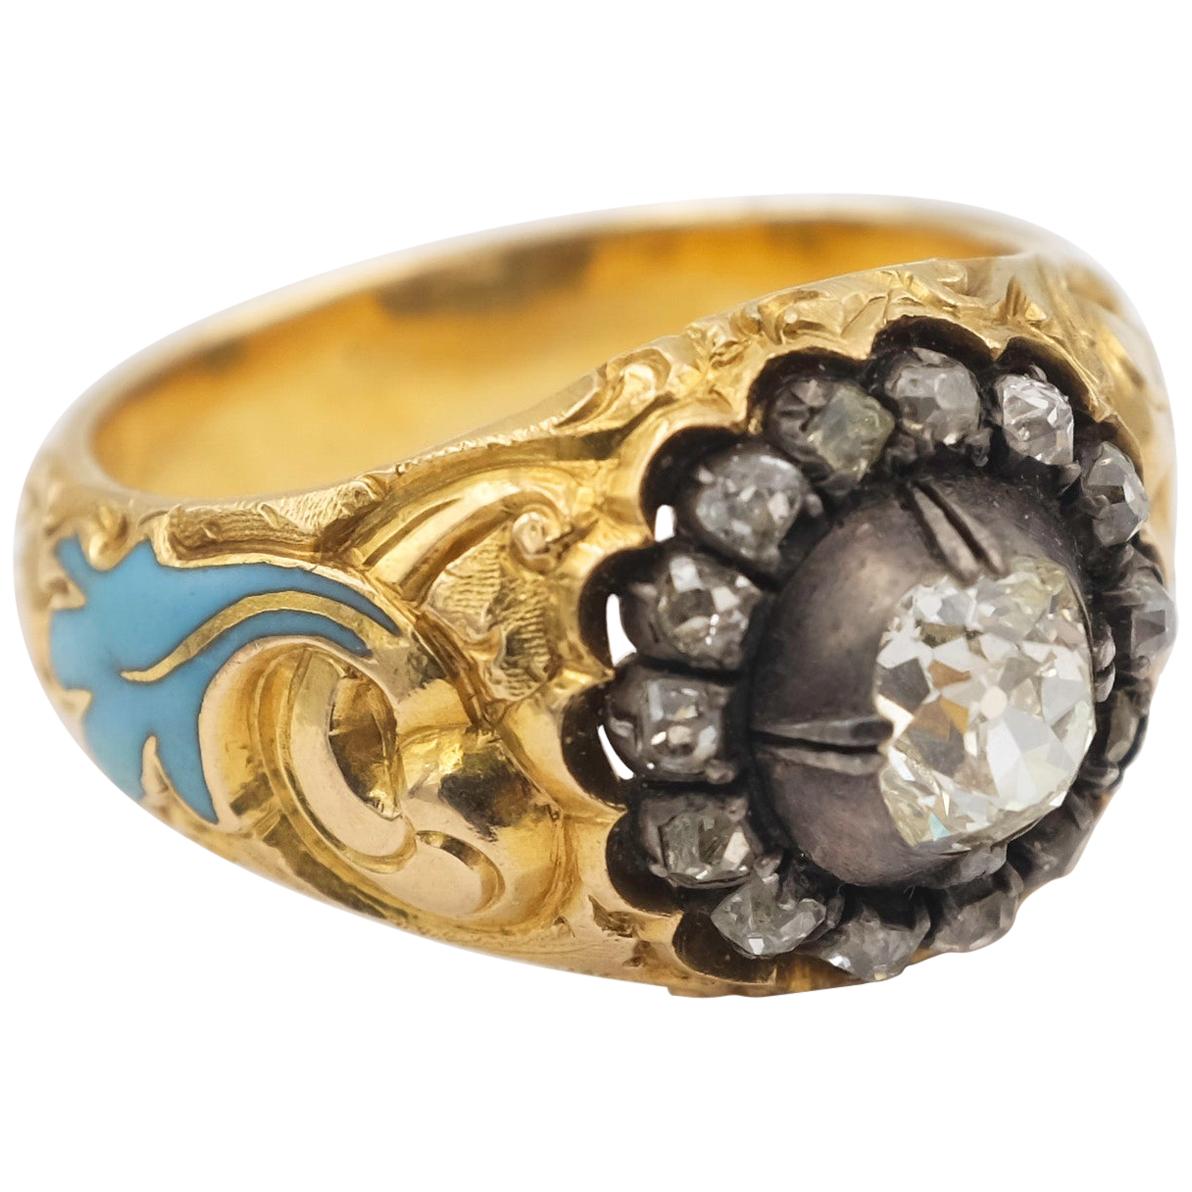 1850s Victorian Men's Ring with Rose Cut Diamond Surrounding an Old European Cut For Sale